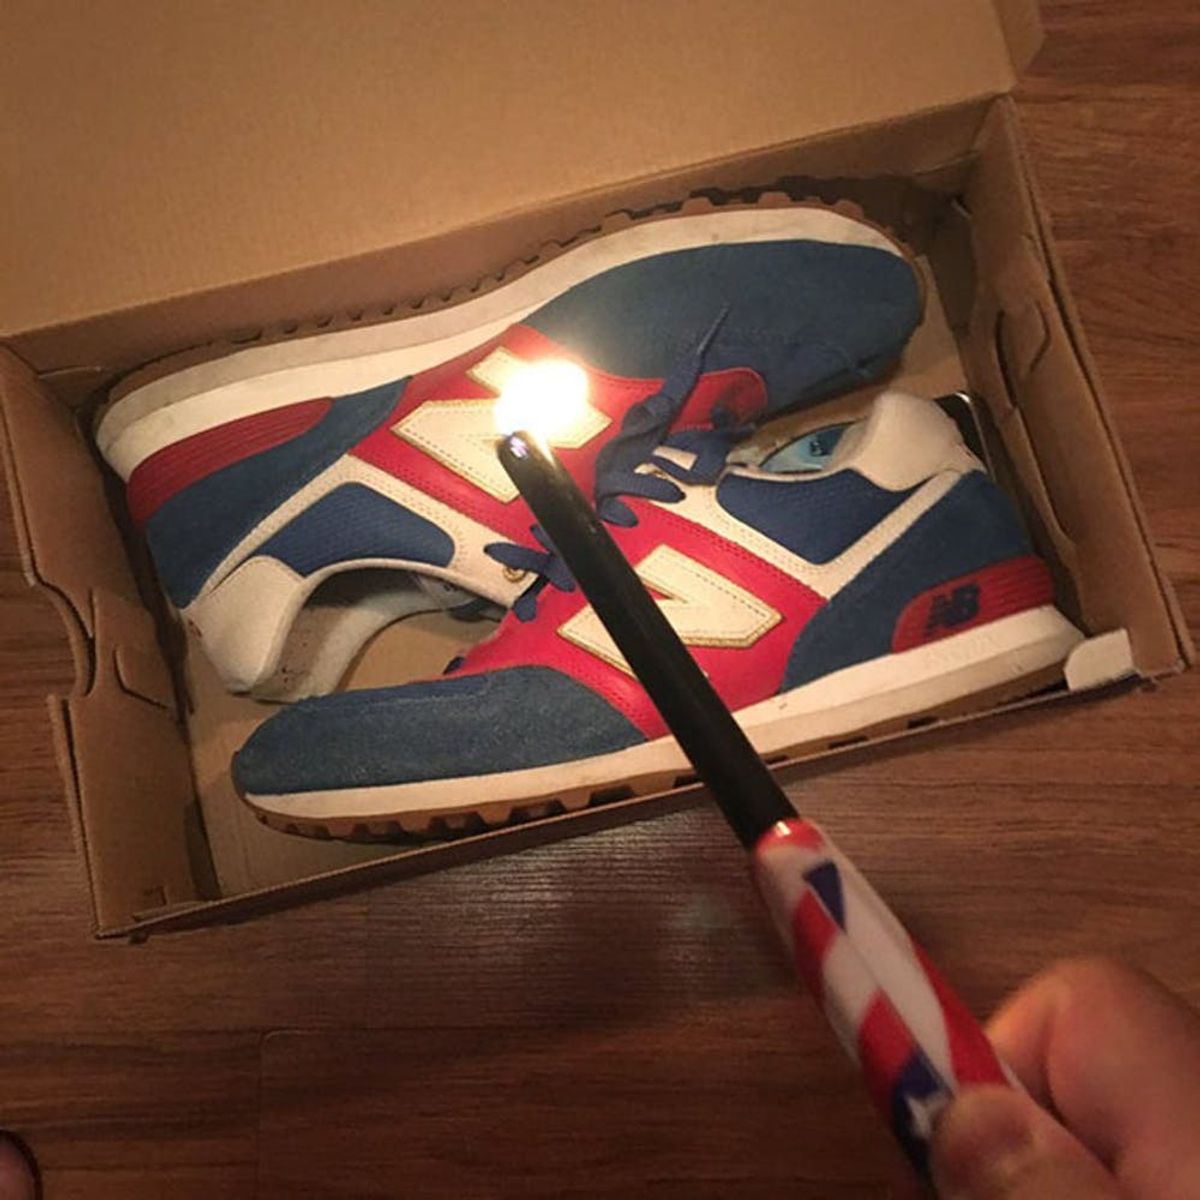 Why Are People Burning Their New Balance Sneakers?